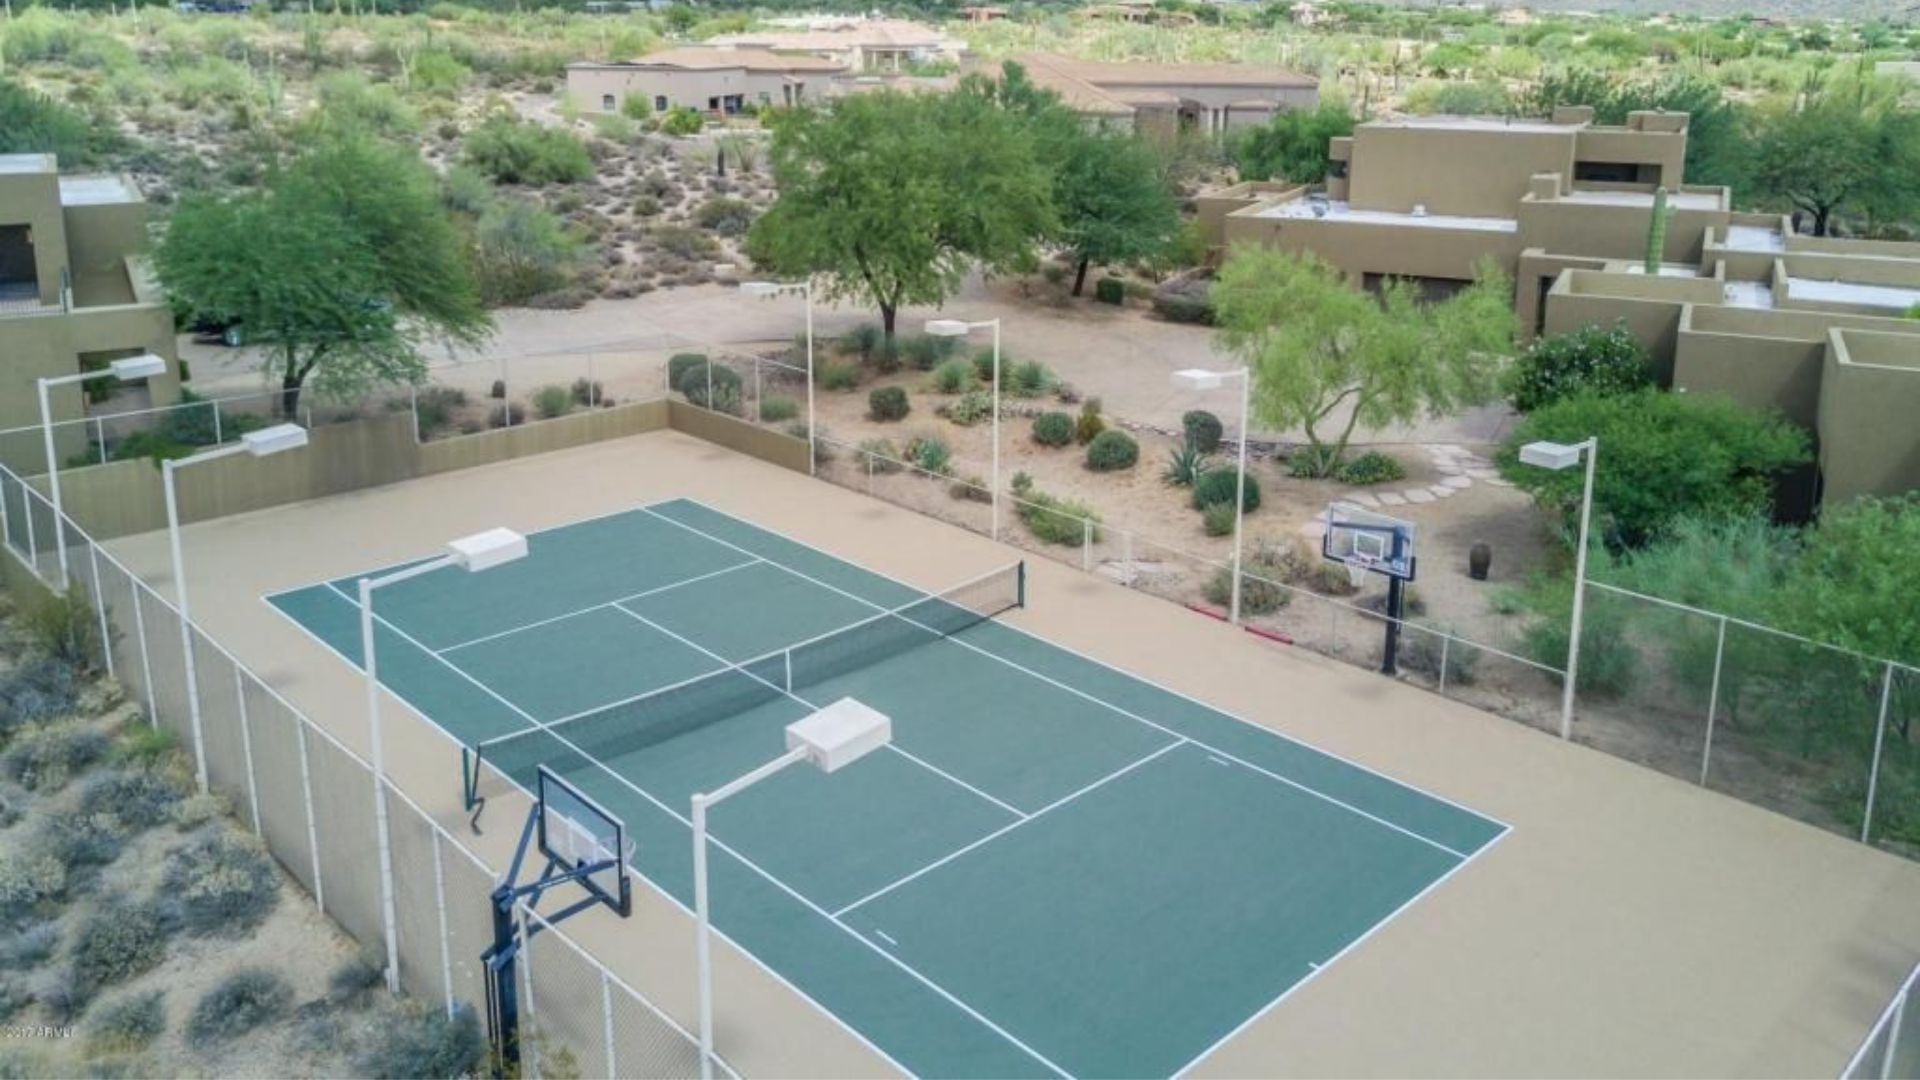 Sport court outside the holistic addiction recovery treatment (HART) rehab